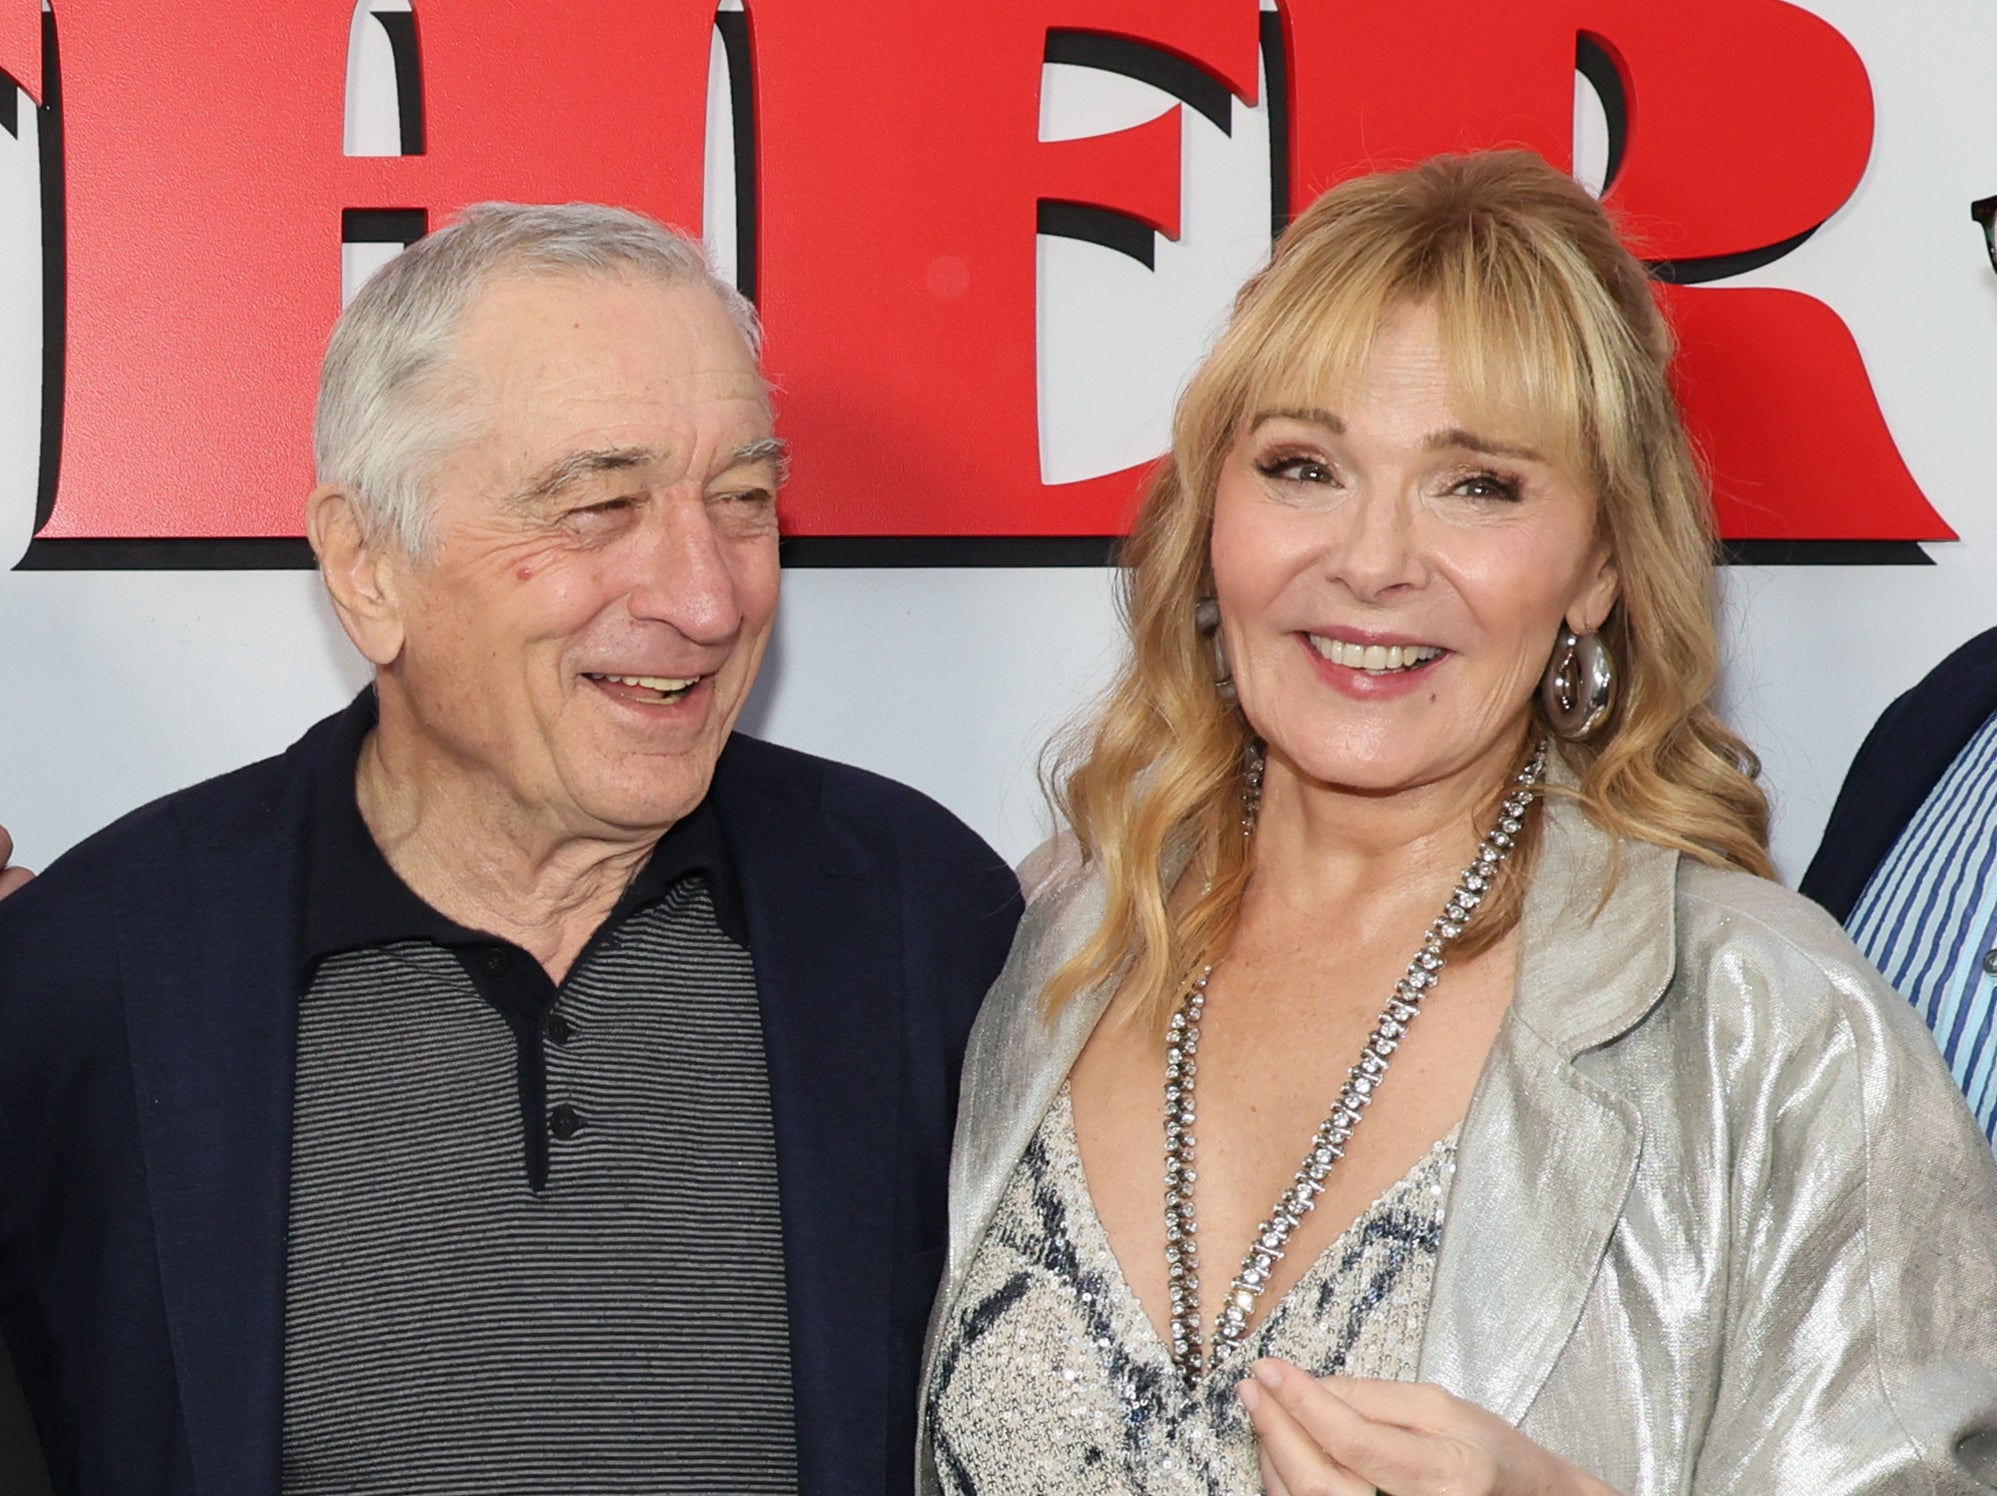 Robert De Niro and Kim Cattrall discussed his new baby at the premiere of their film About My Father